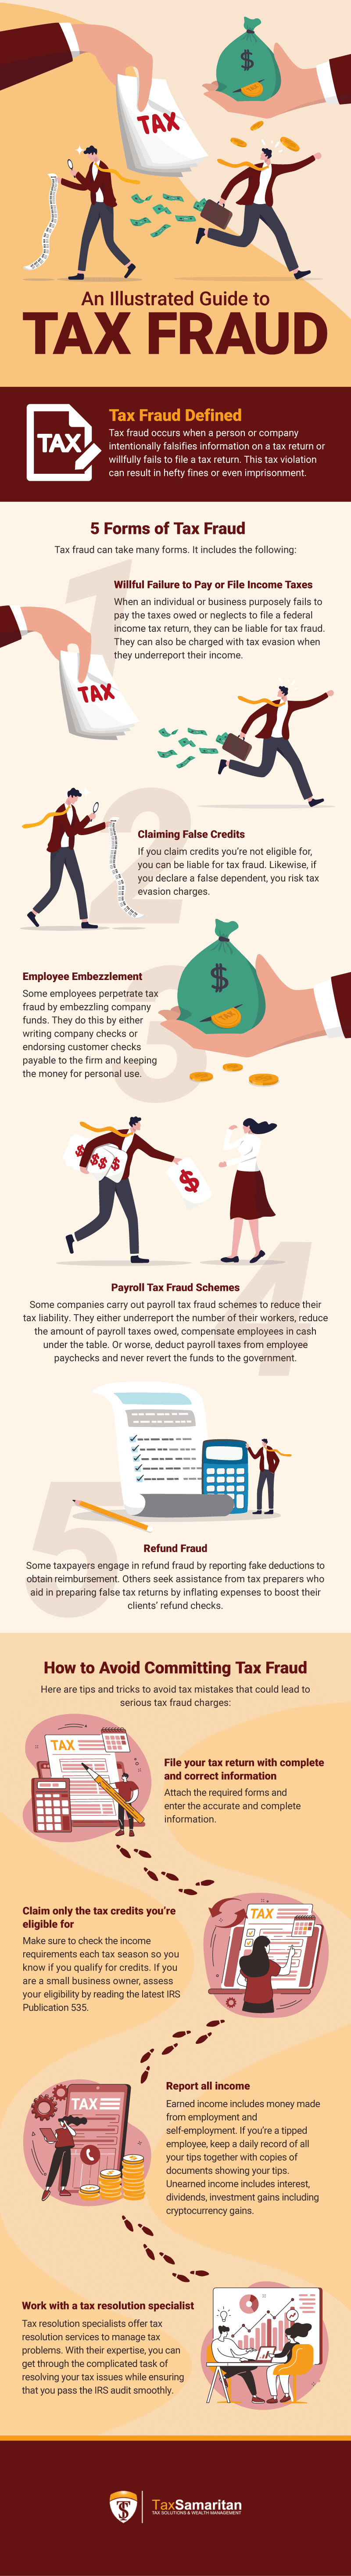 An Illustrated Guide to Tax Fraud